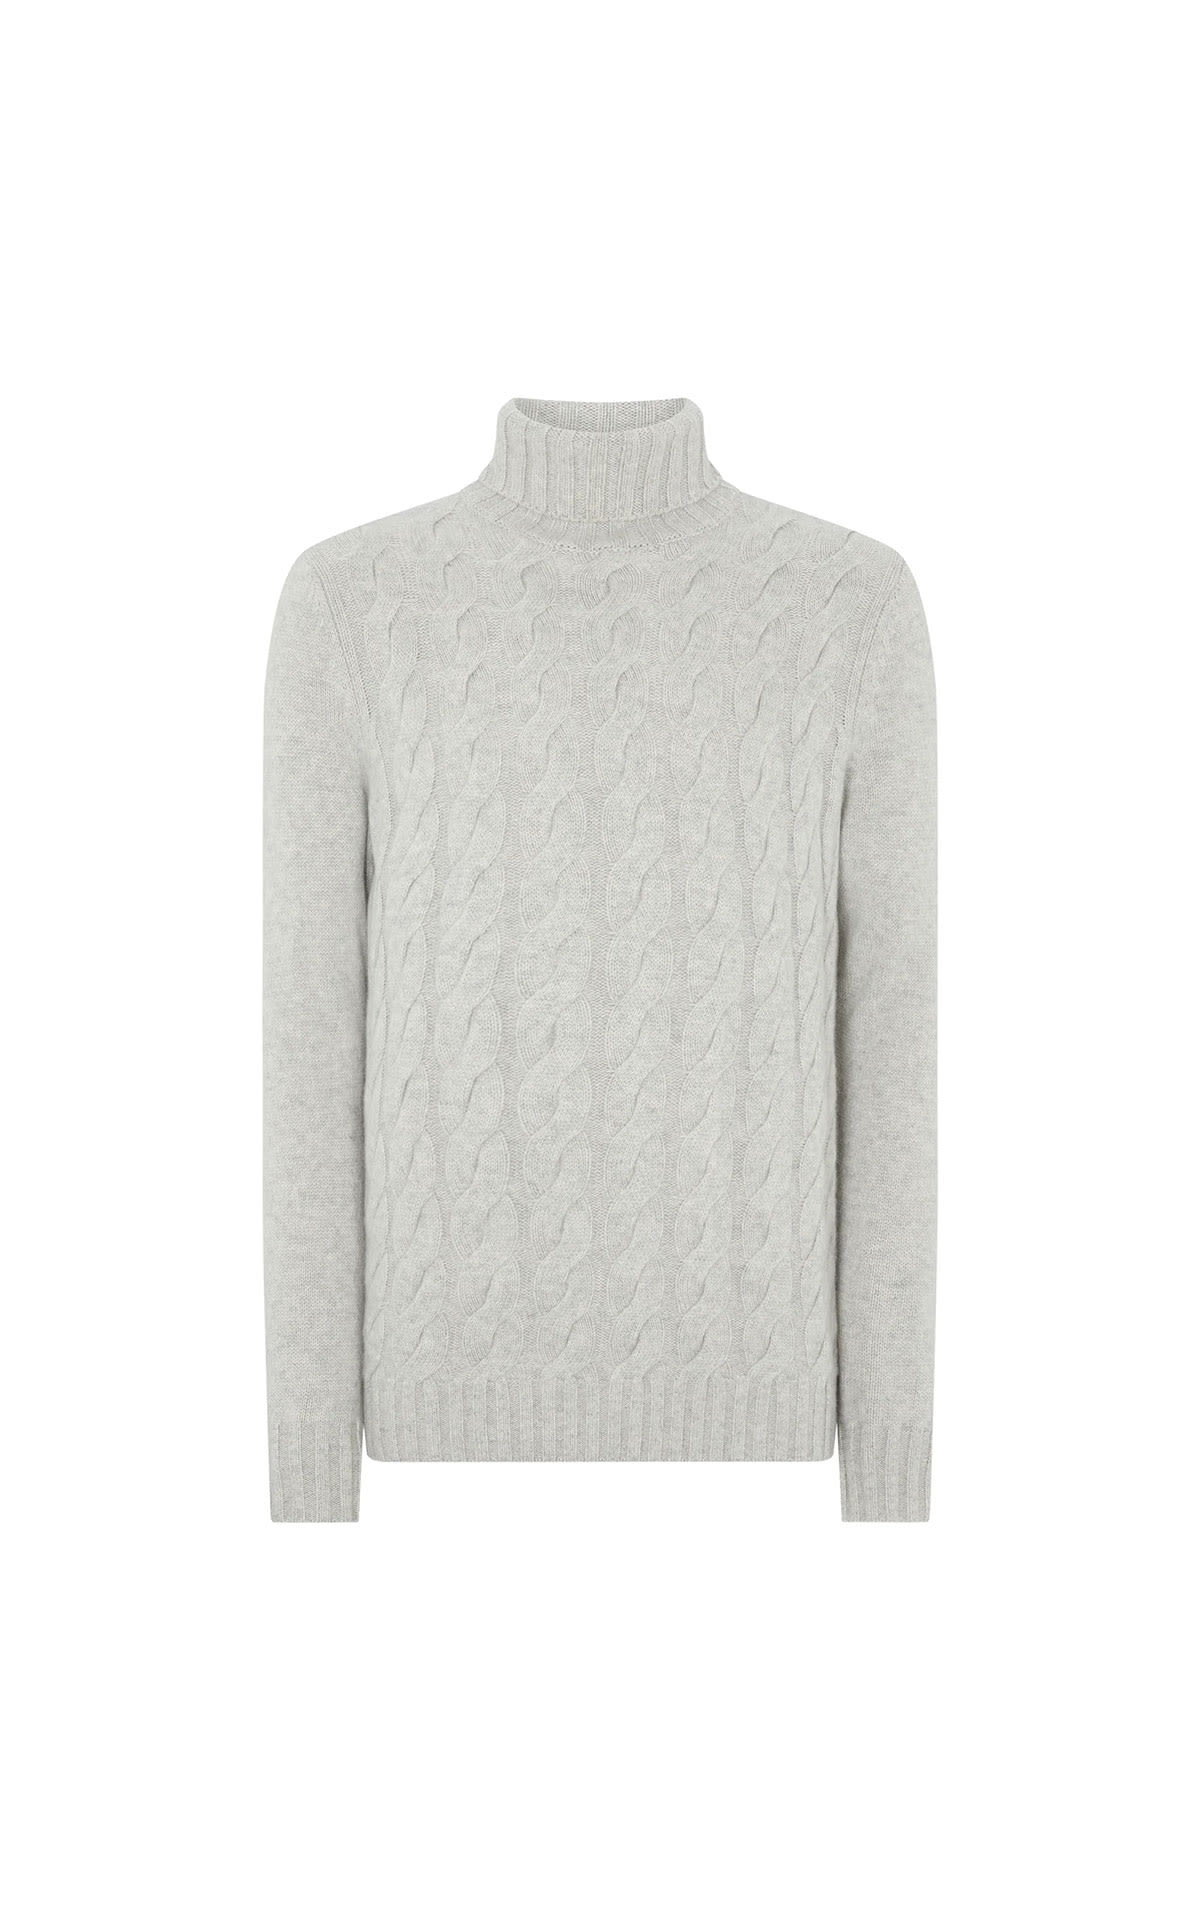 N. Peal Roll neck cable cashmere jumper fumo grey  from Bicester Village